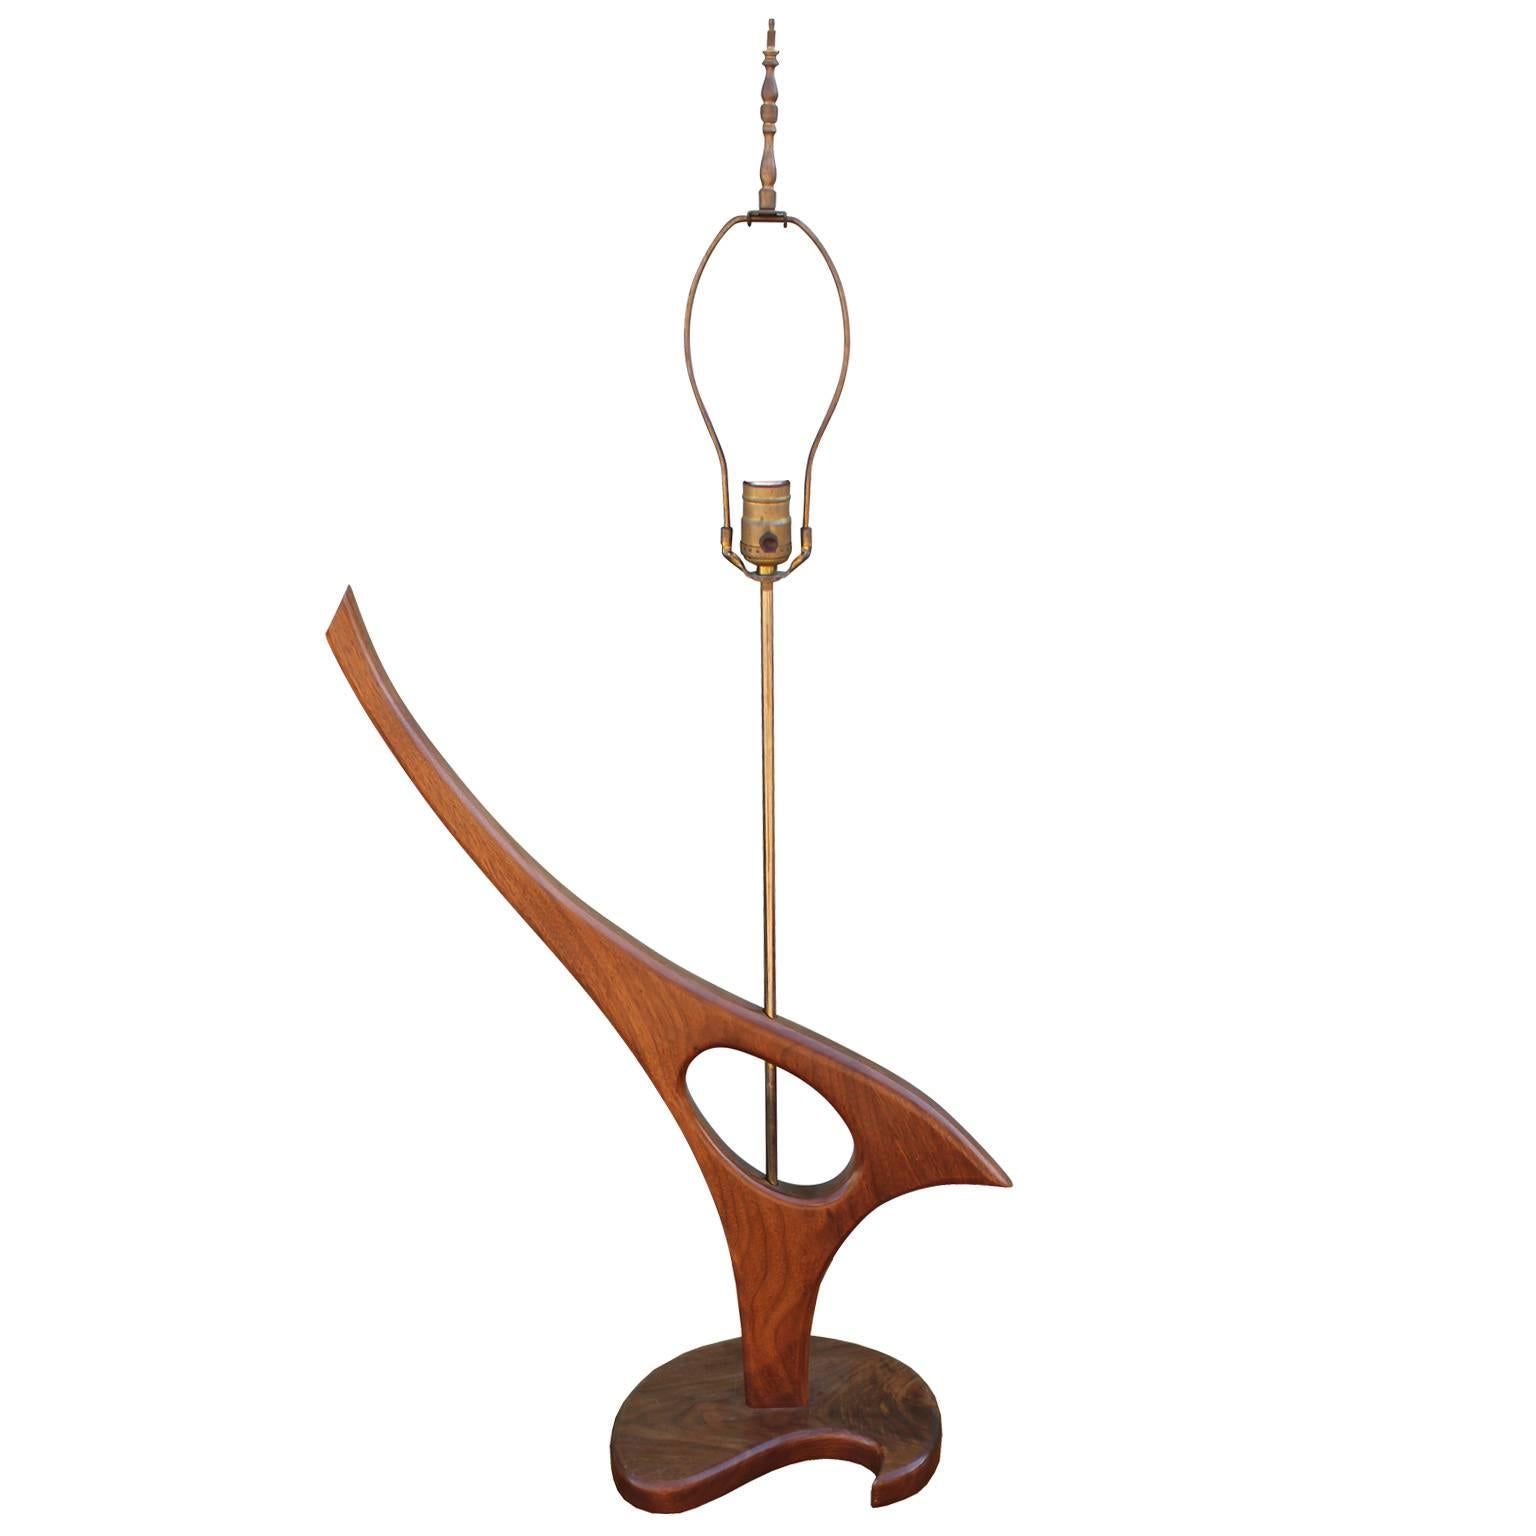 Sculptural pair of walnut table lamps. Organic, bird shaped lamps on paisley shaped bases. Brass hardware.